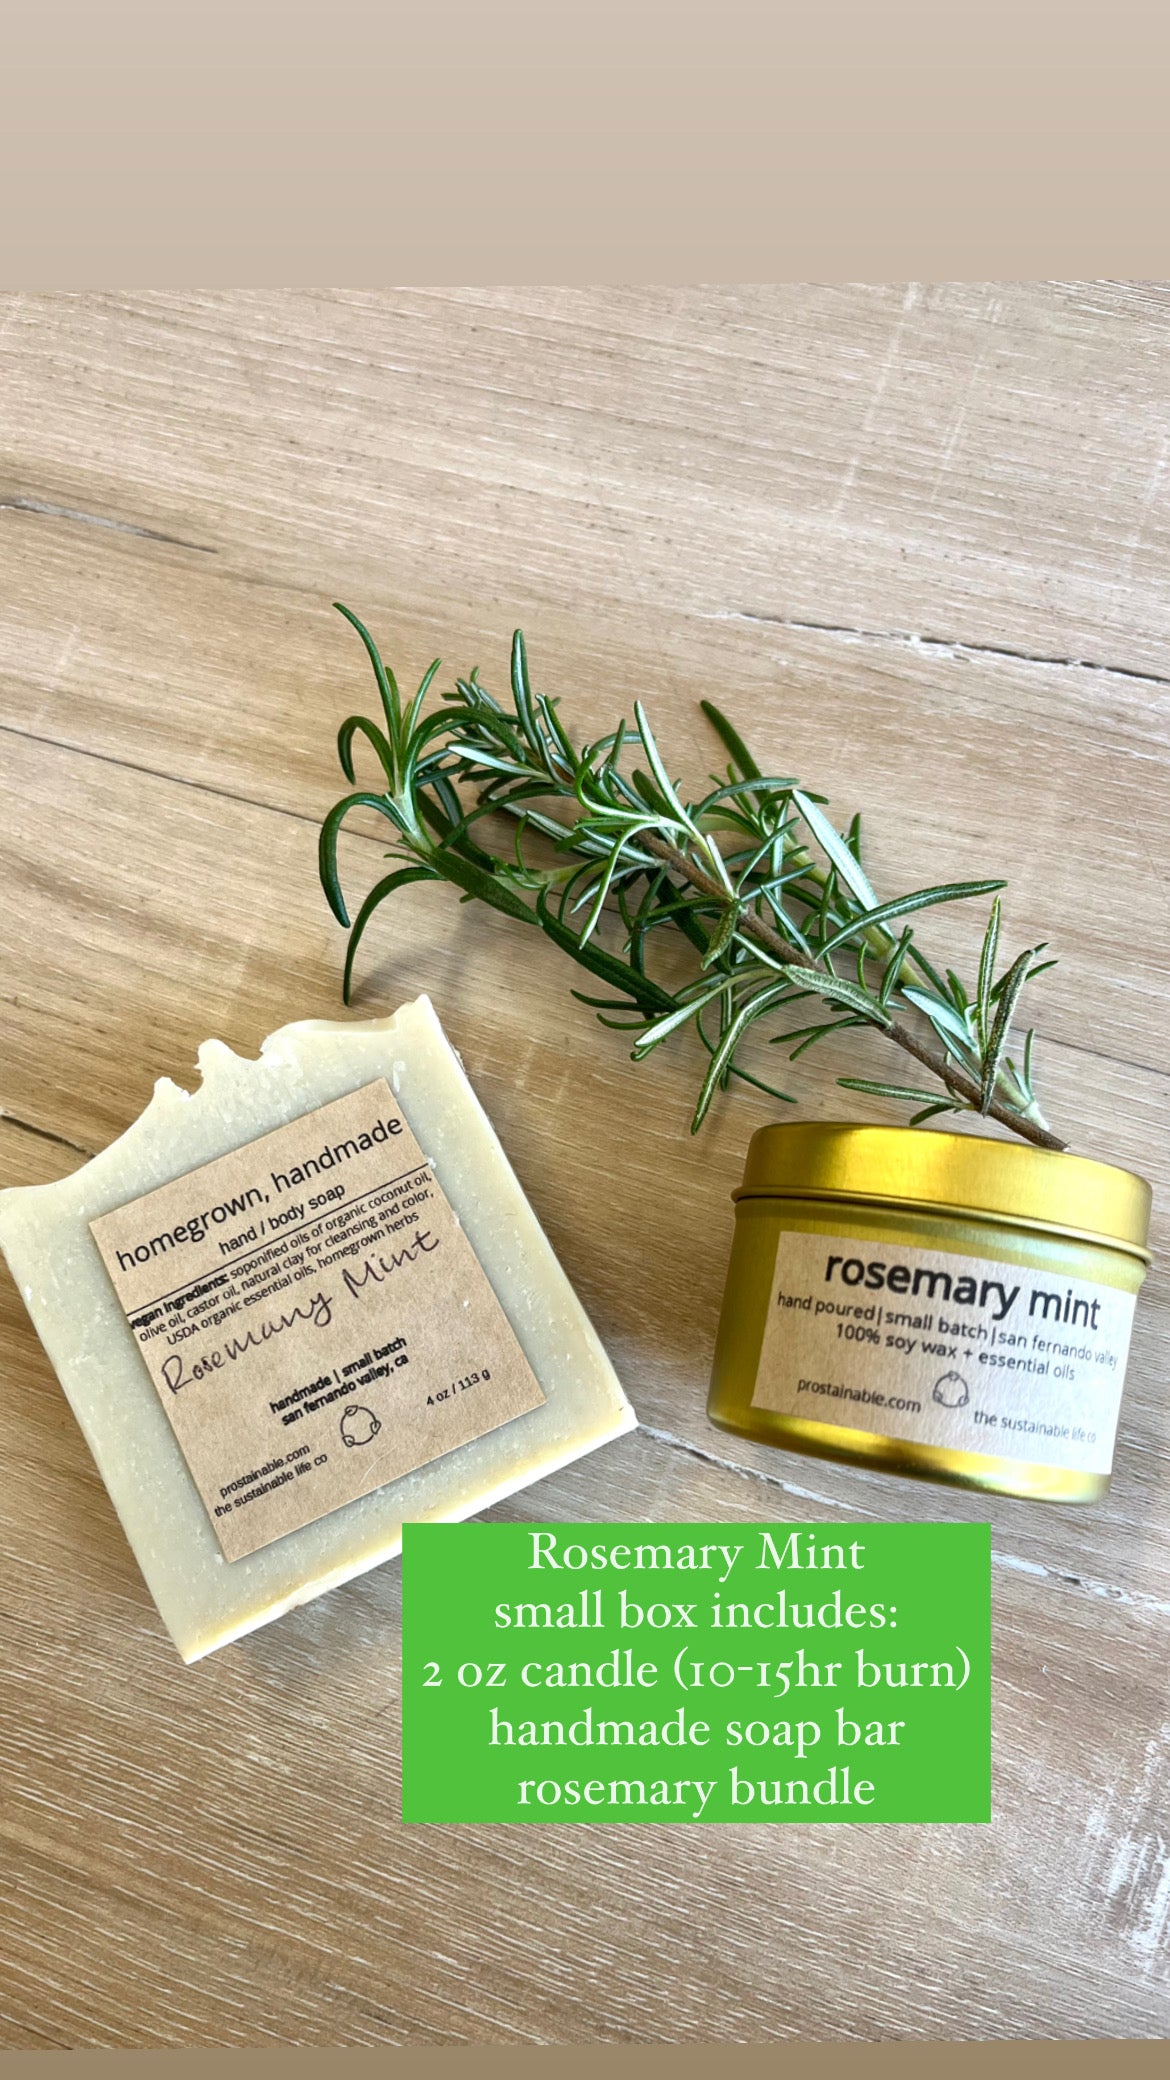 Mother’s Day Box (Rosemary Mint)